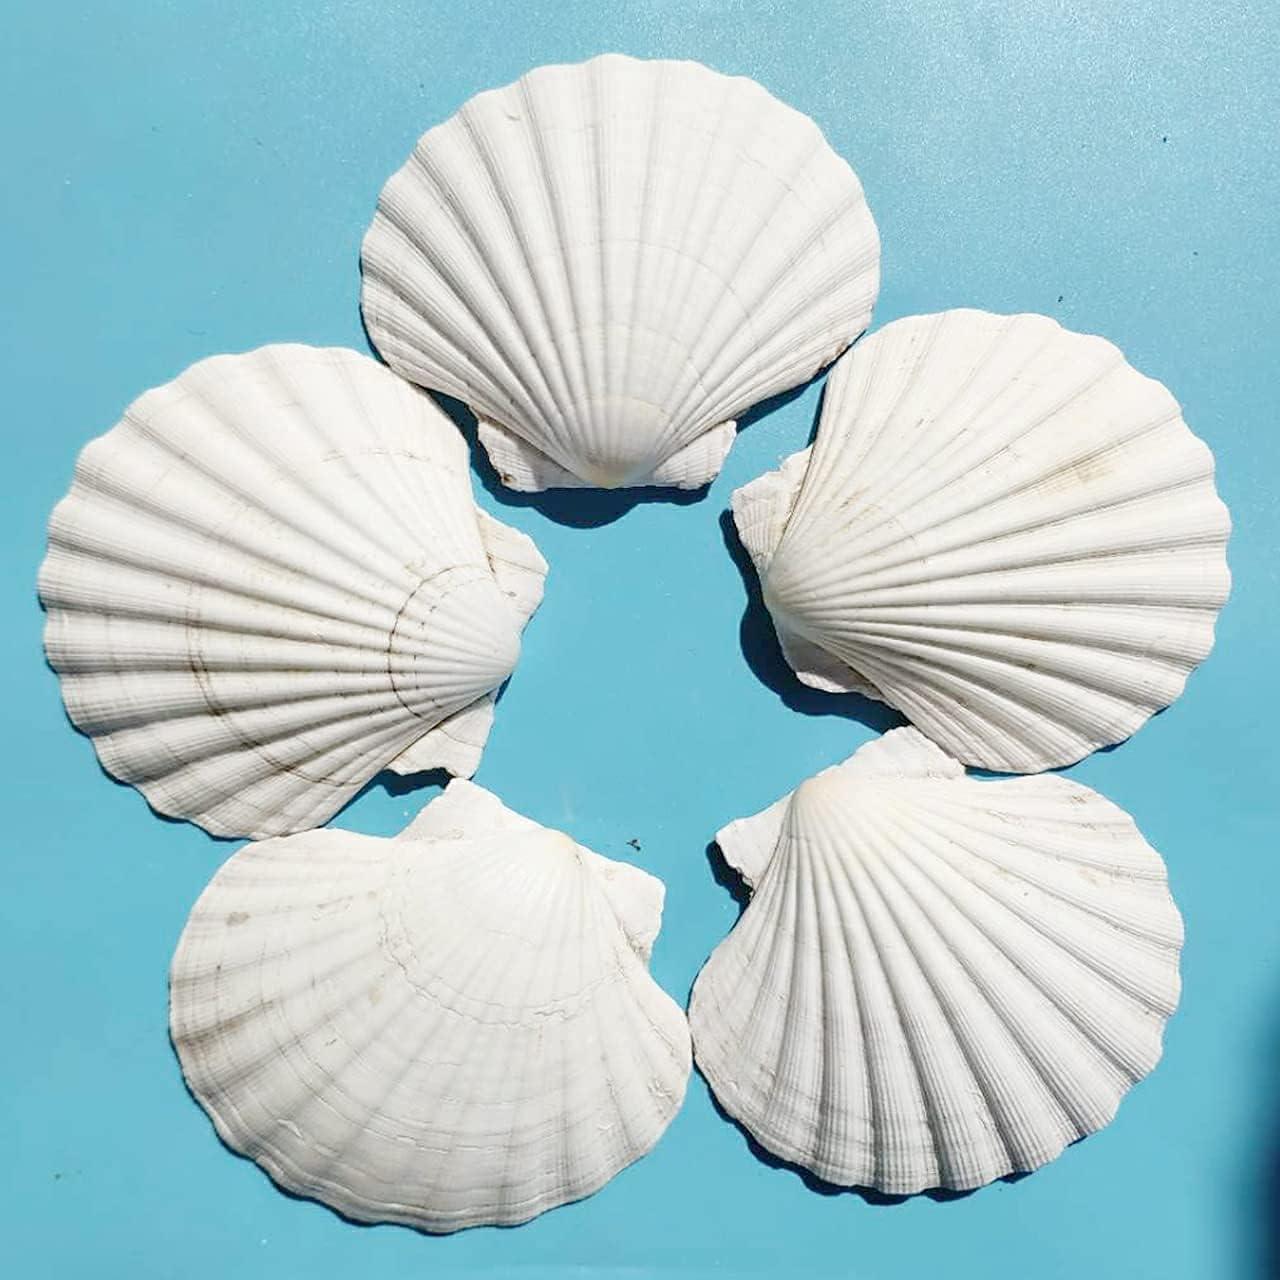 10PCS Large Natural Scallop Shells, 4''-5'' Large Shell for Crafts, DIY  Painting, Baking and Beach Wedding Decorations - Large White Seashells Bulk